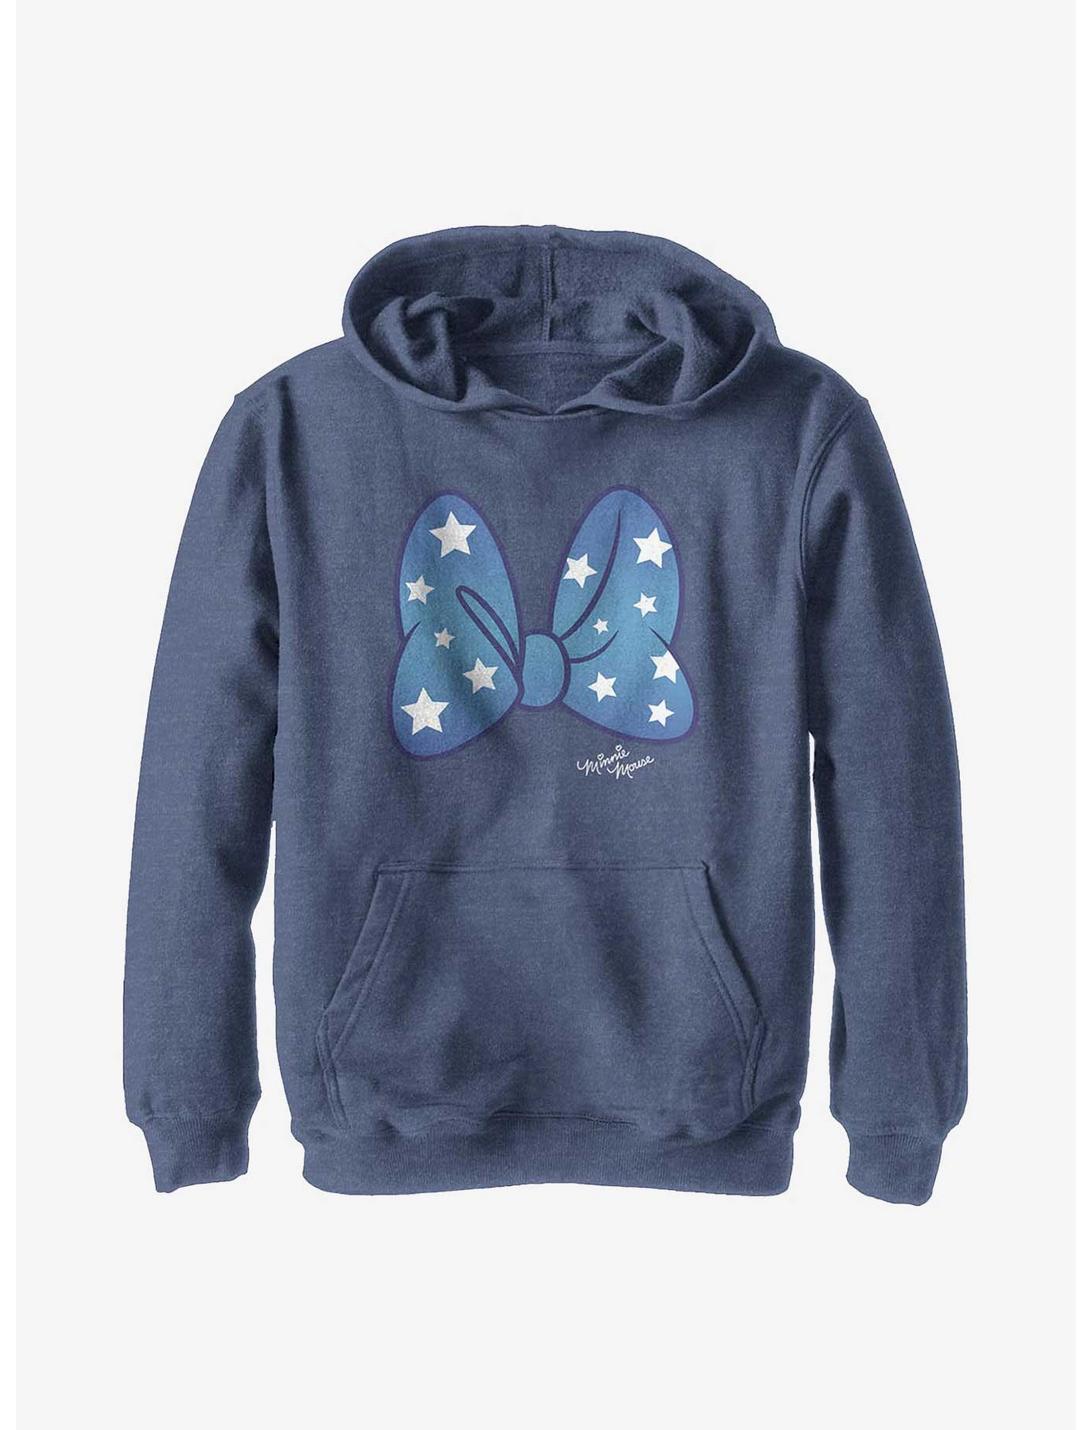 Plus Size Disney Minnie Mouse Stars Bow Youth Hoodie, NAVY HTR, hi-res